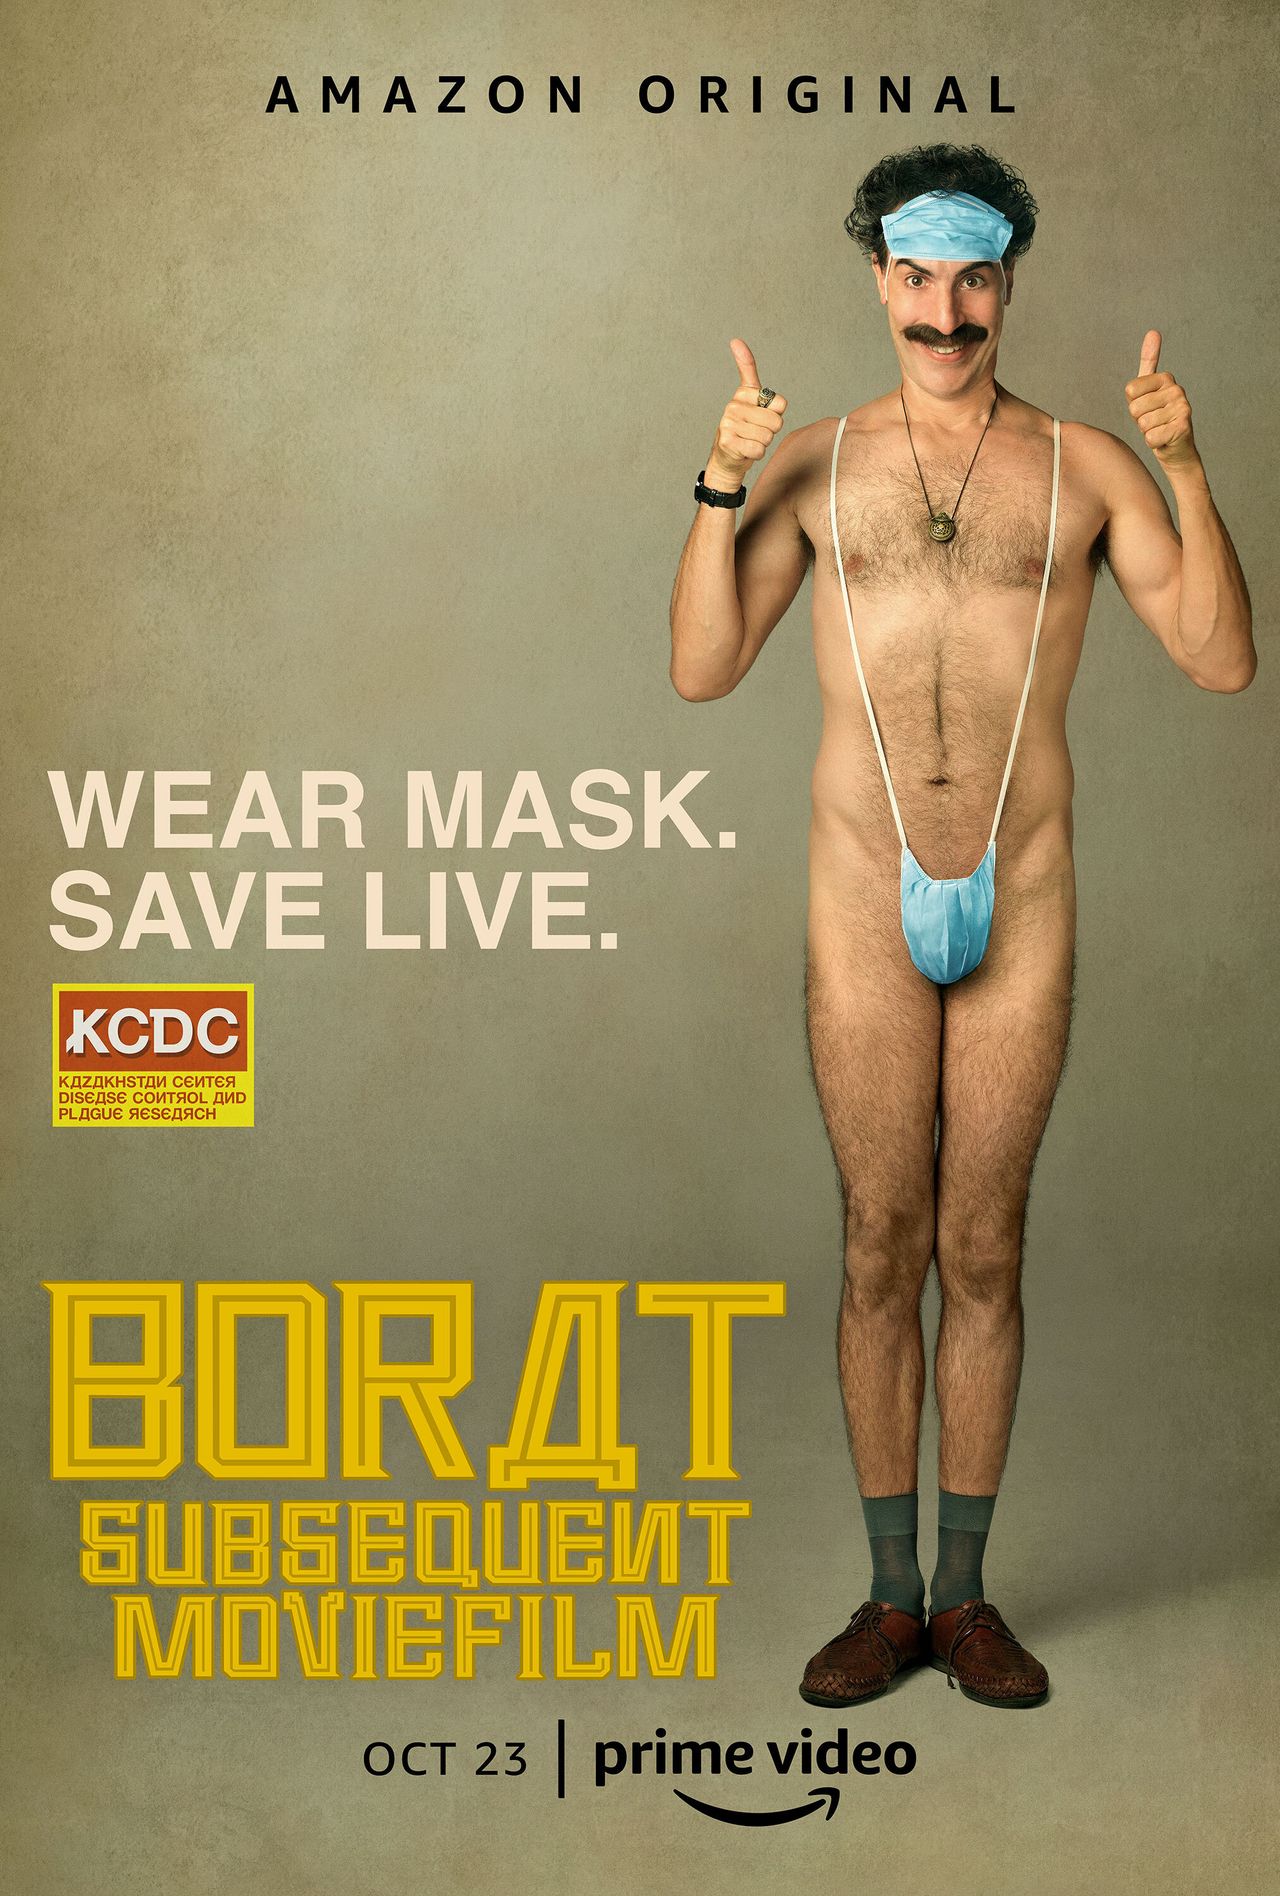 The Borat Subsequent Moviefilm poster